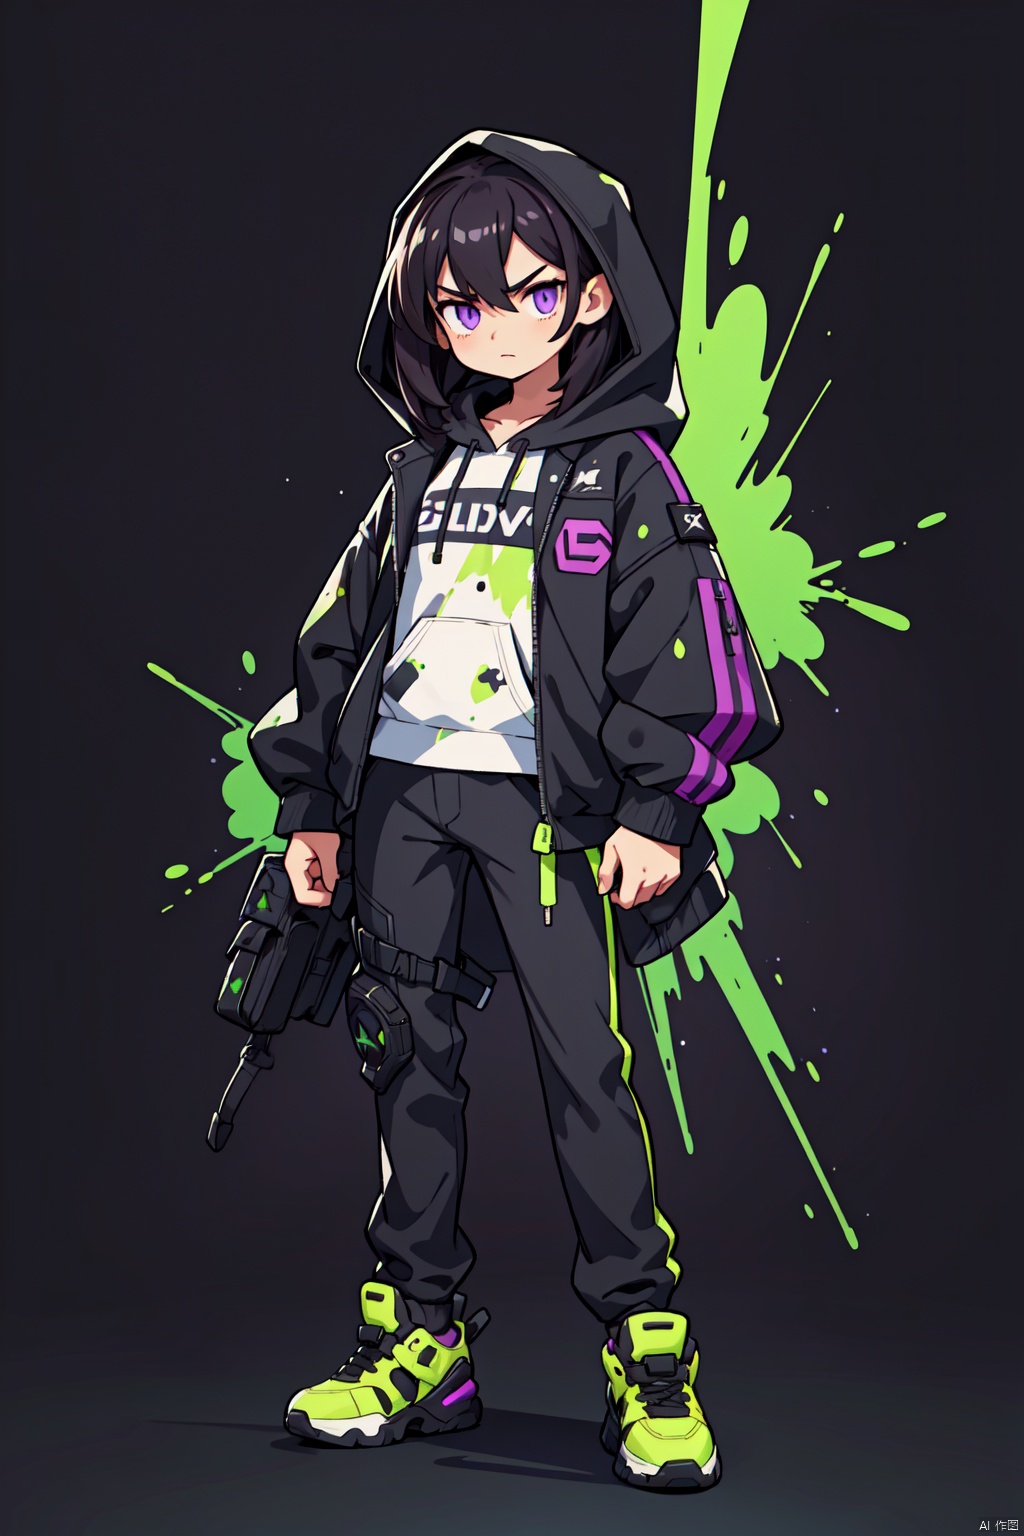 solo,(masterpiece), (best quality),A futuristic animated character with dark hair, purple eyes, and a stern expression, wearing a black jacket adorned with a logo and a hoodie beneath, stands confidently against a dark background, surrounded by neon-green splatters